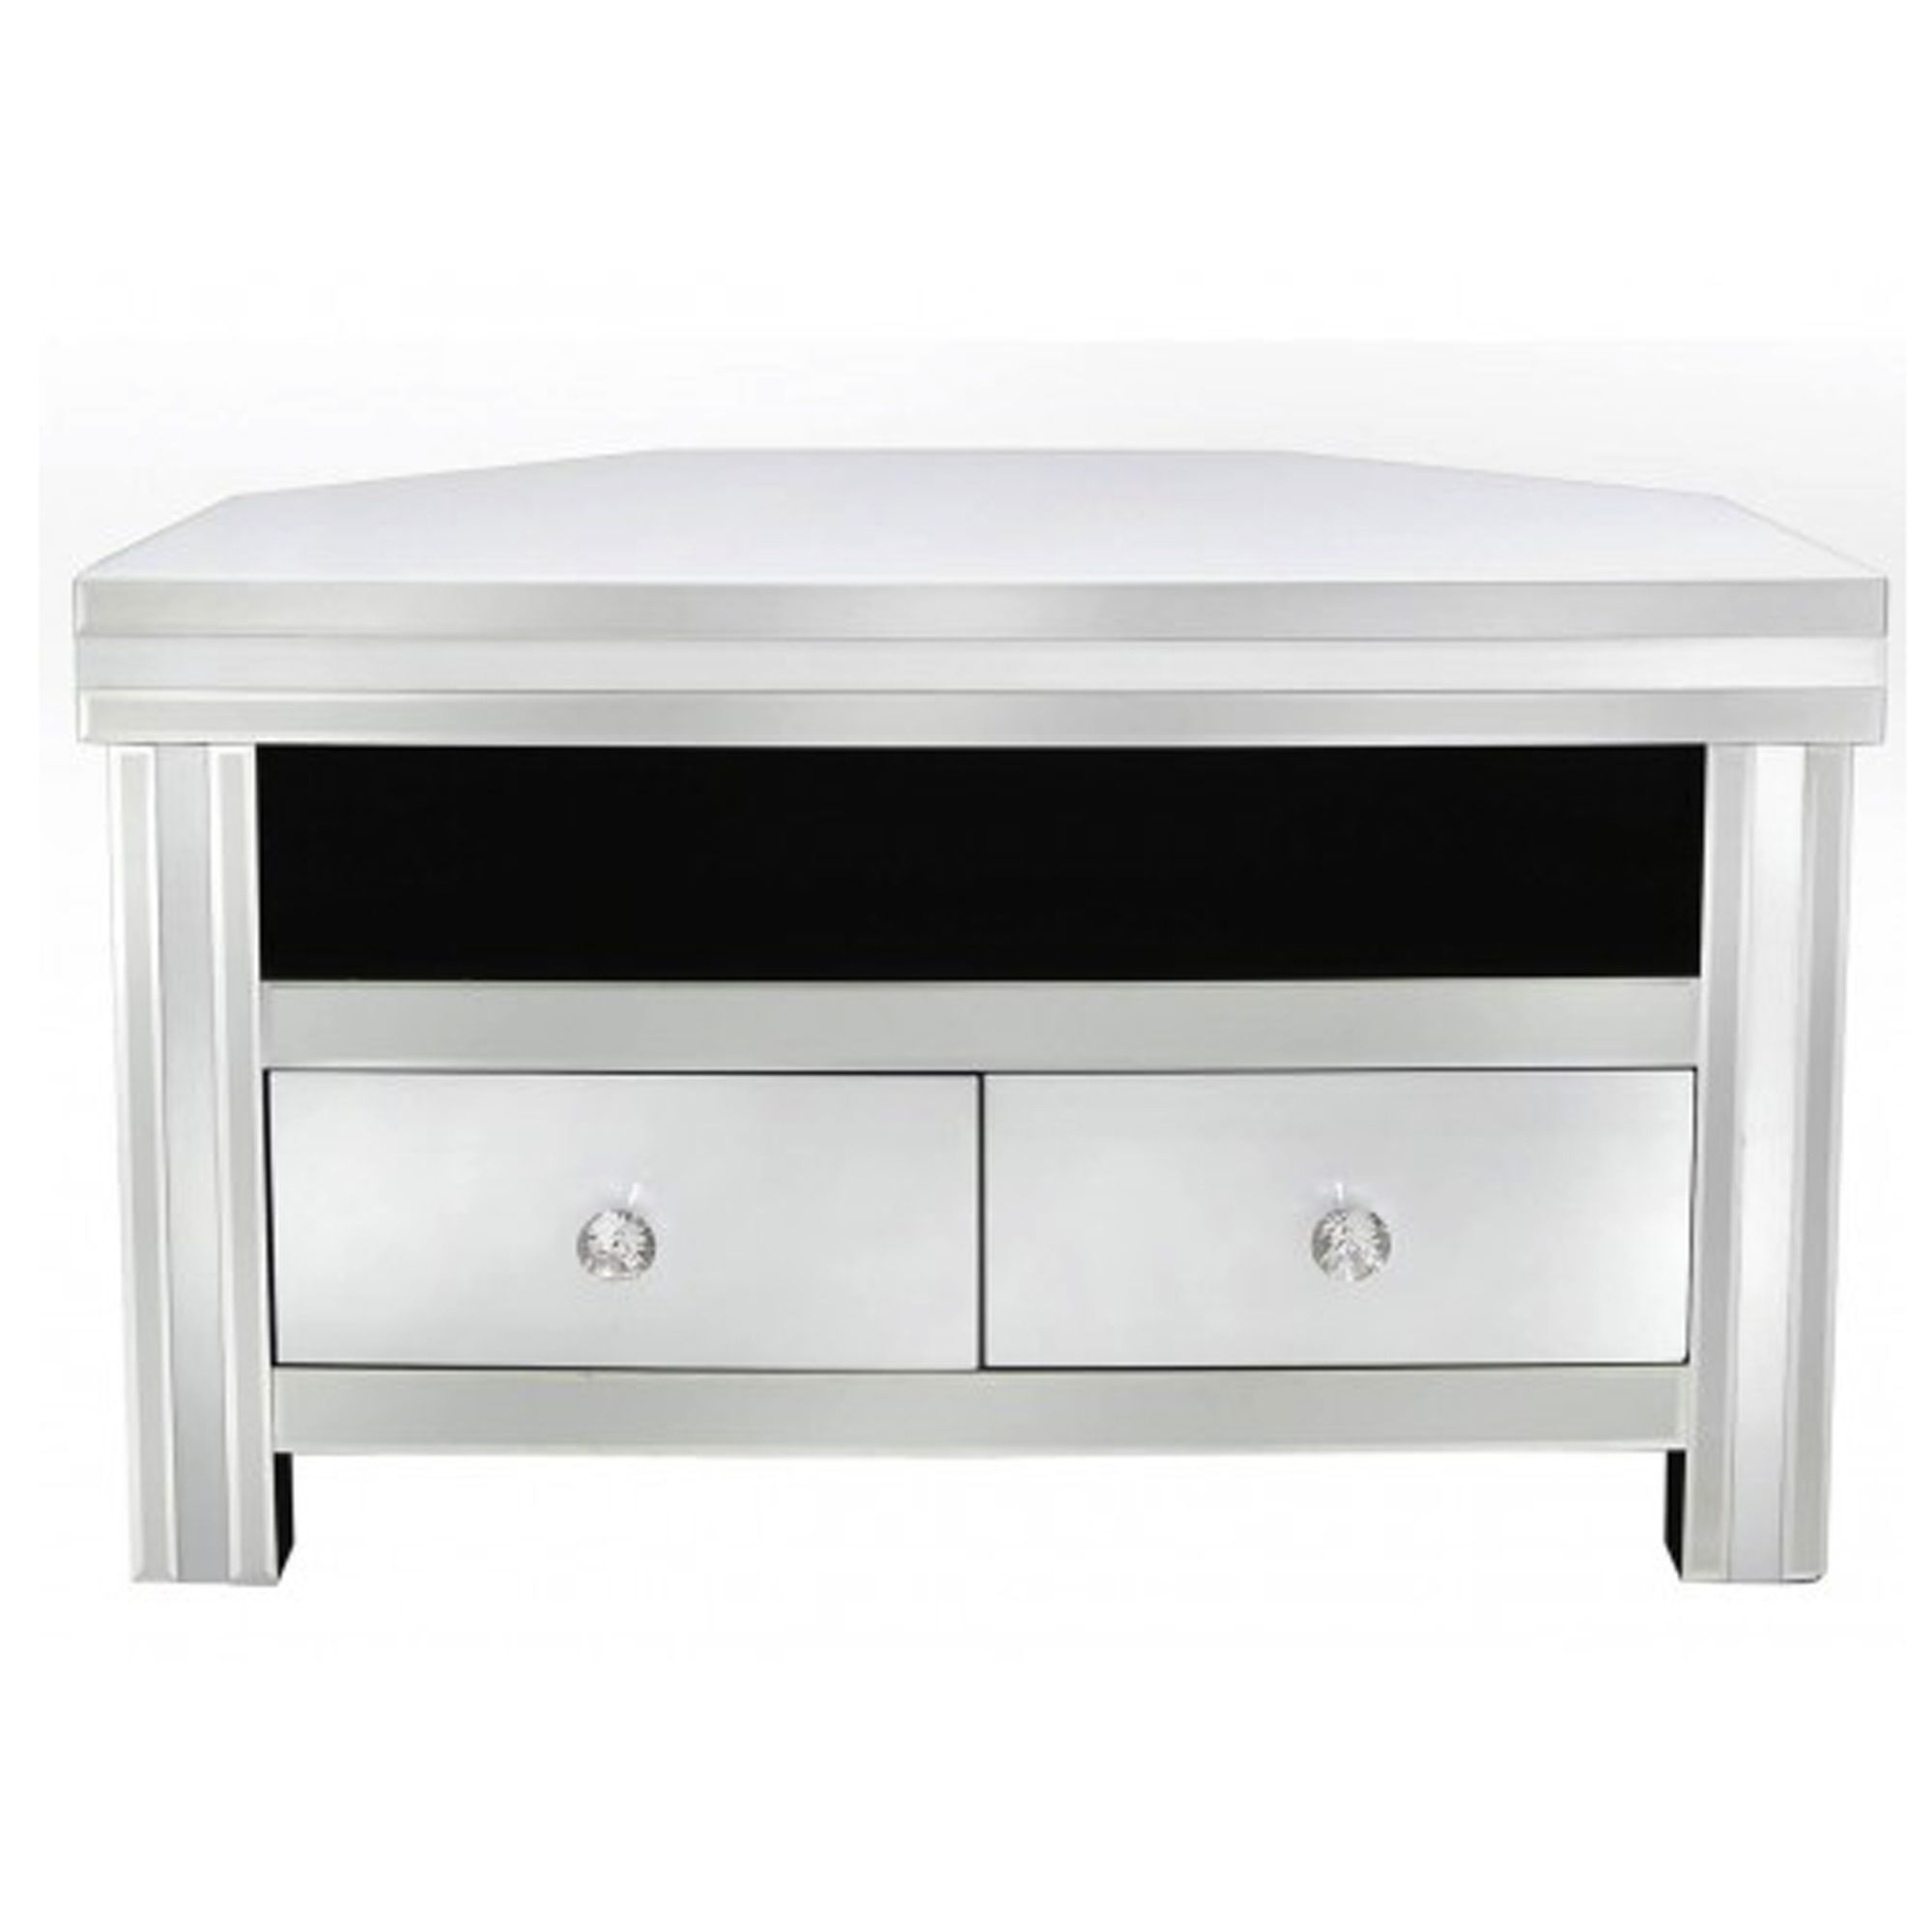 Alghero White Mirrored Corner Tv Unit | Tv Stands Throughout Fitzgerald Mirrored Tv Stands (View 2 of 15)